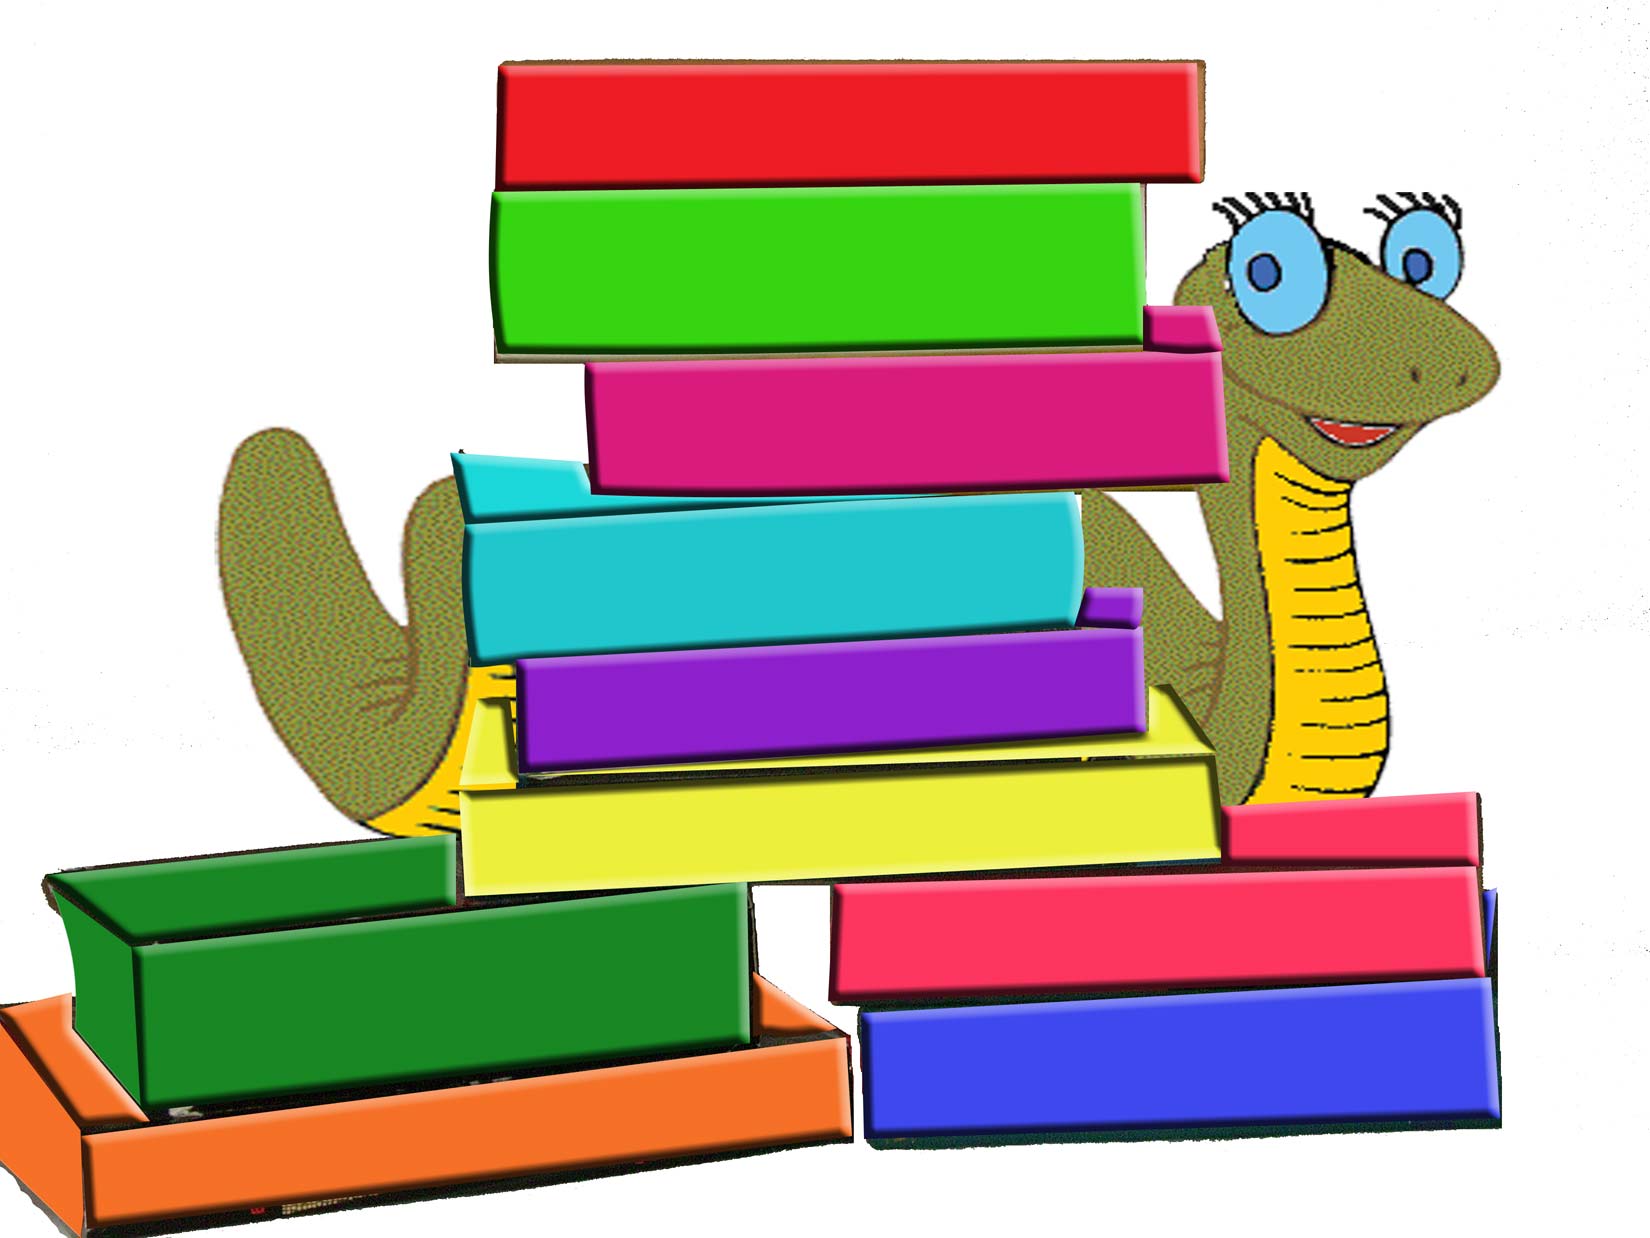 Stack of books image of stack books clipart a of clip art 2